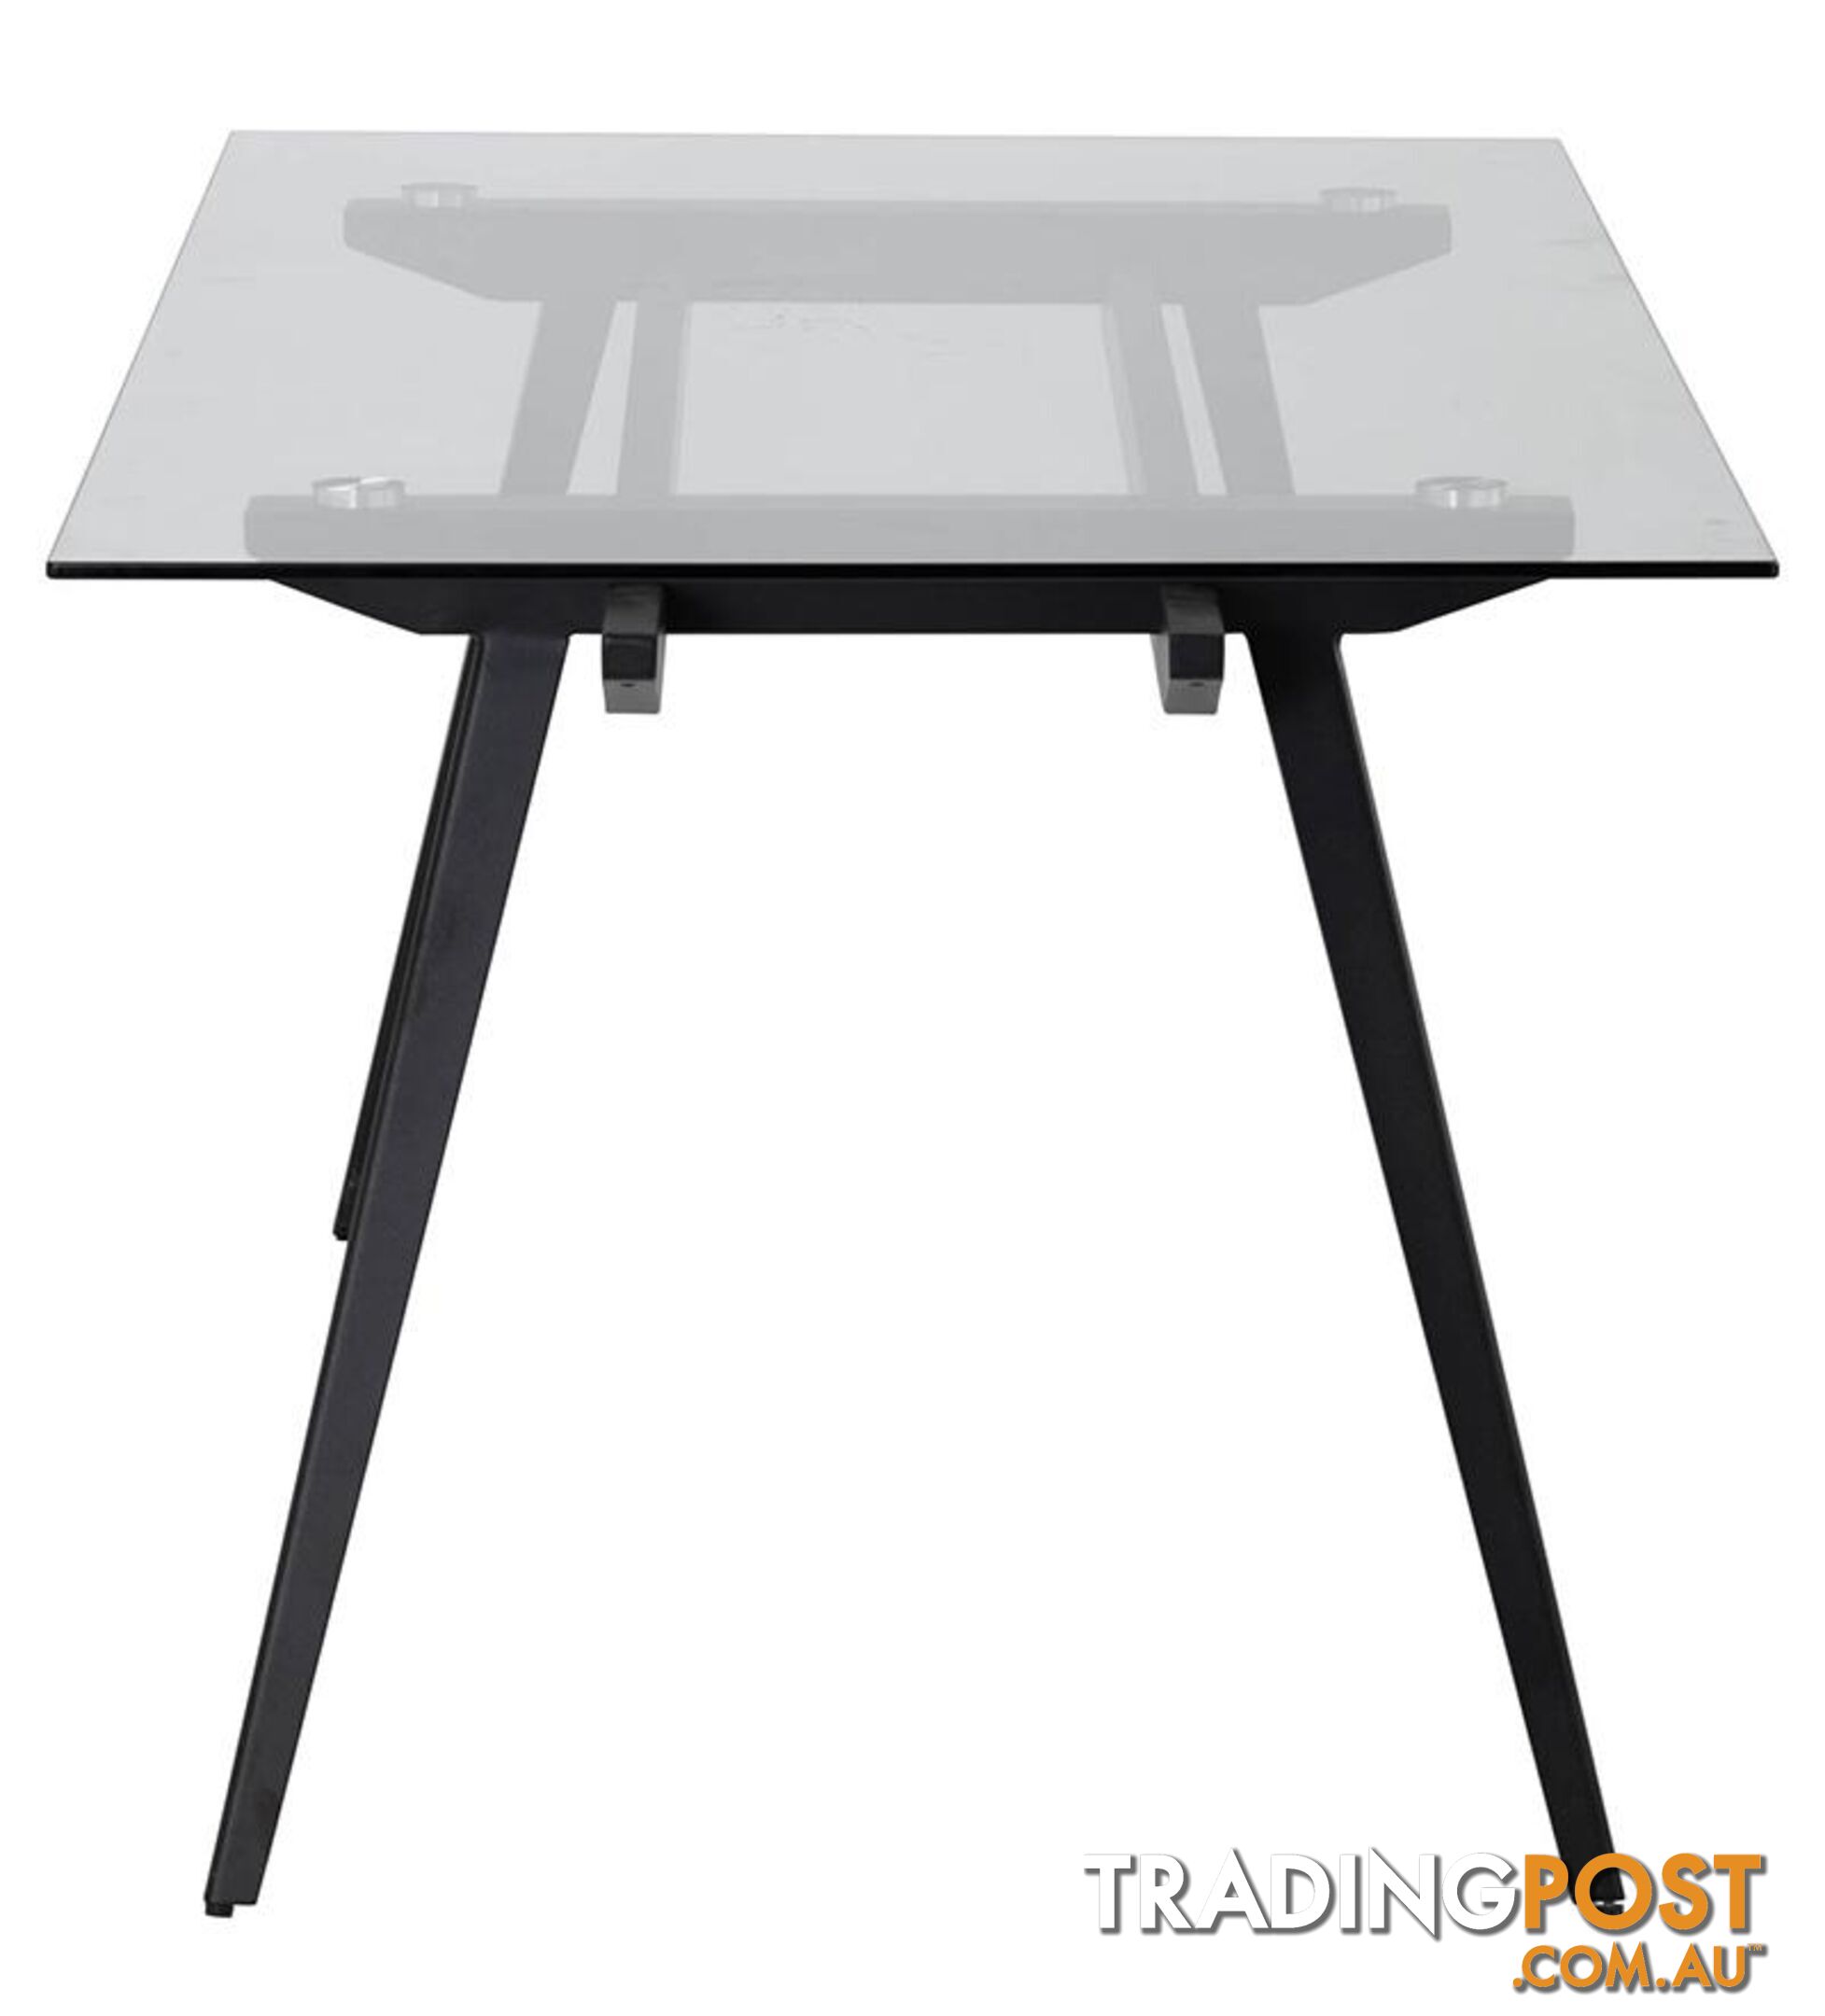 ARCHIE Glass Dining Table 180cm - 146054 - 9334719000695